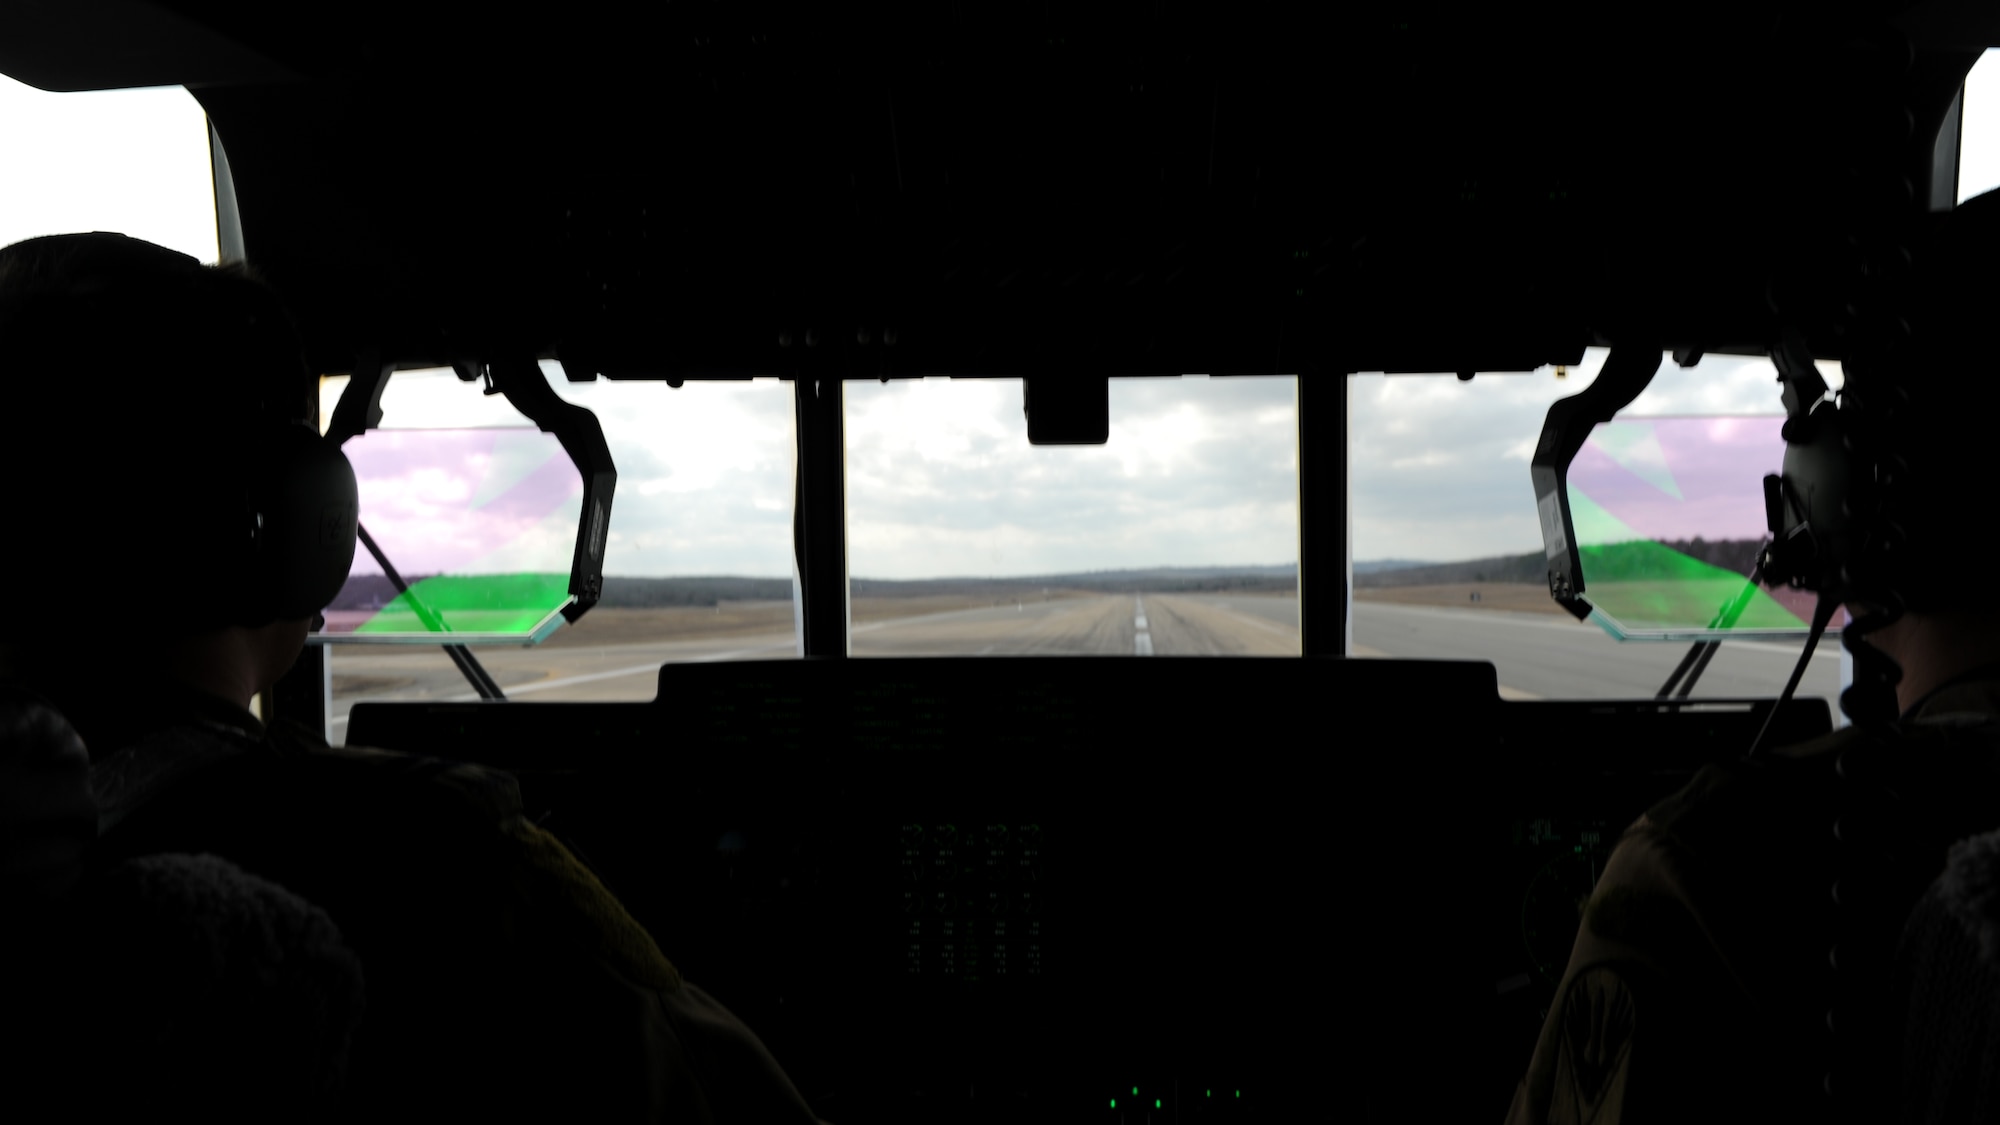 A rectangle photo with two silhouettes in front of an aircraft windshield.